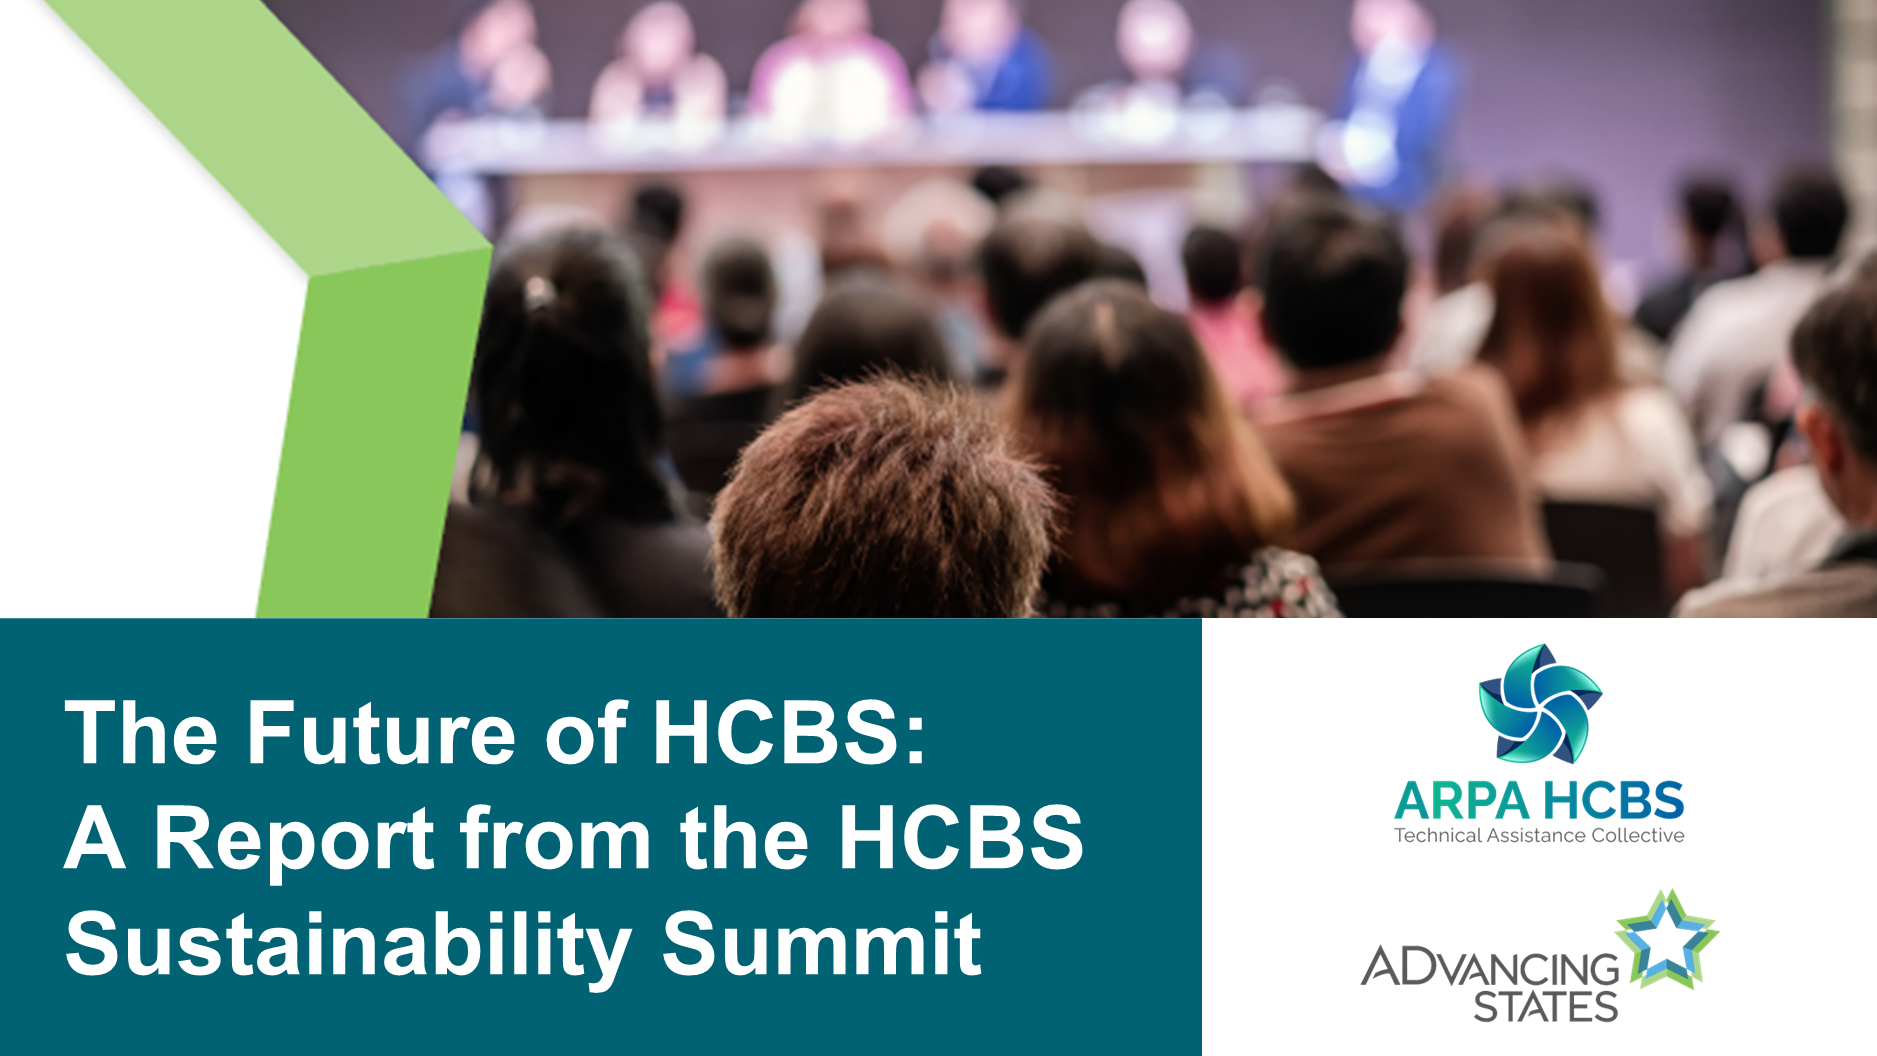 The Future of HCBS: A Report from the HCBS Sustainability Summit